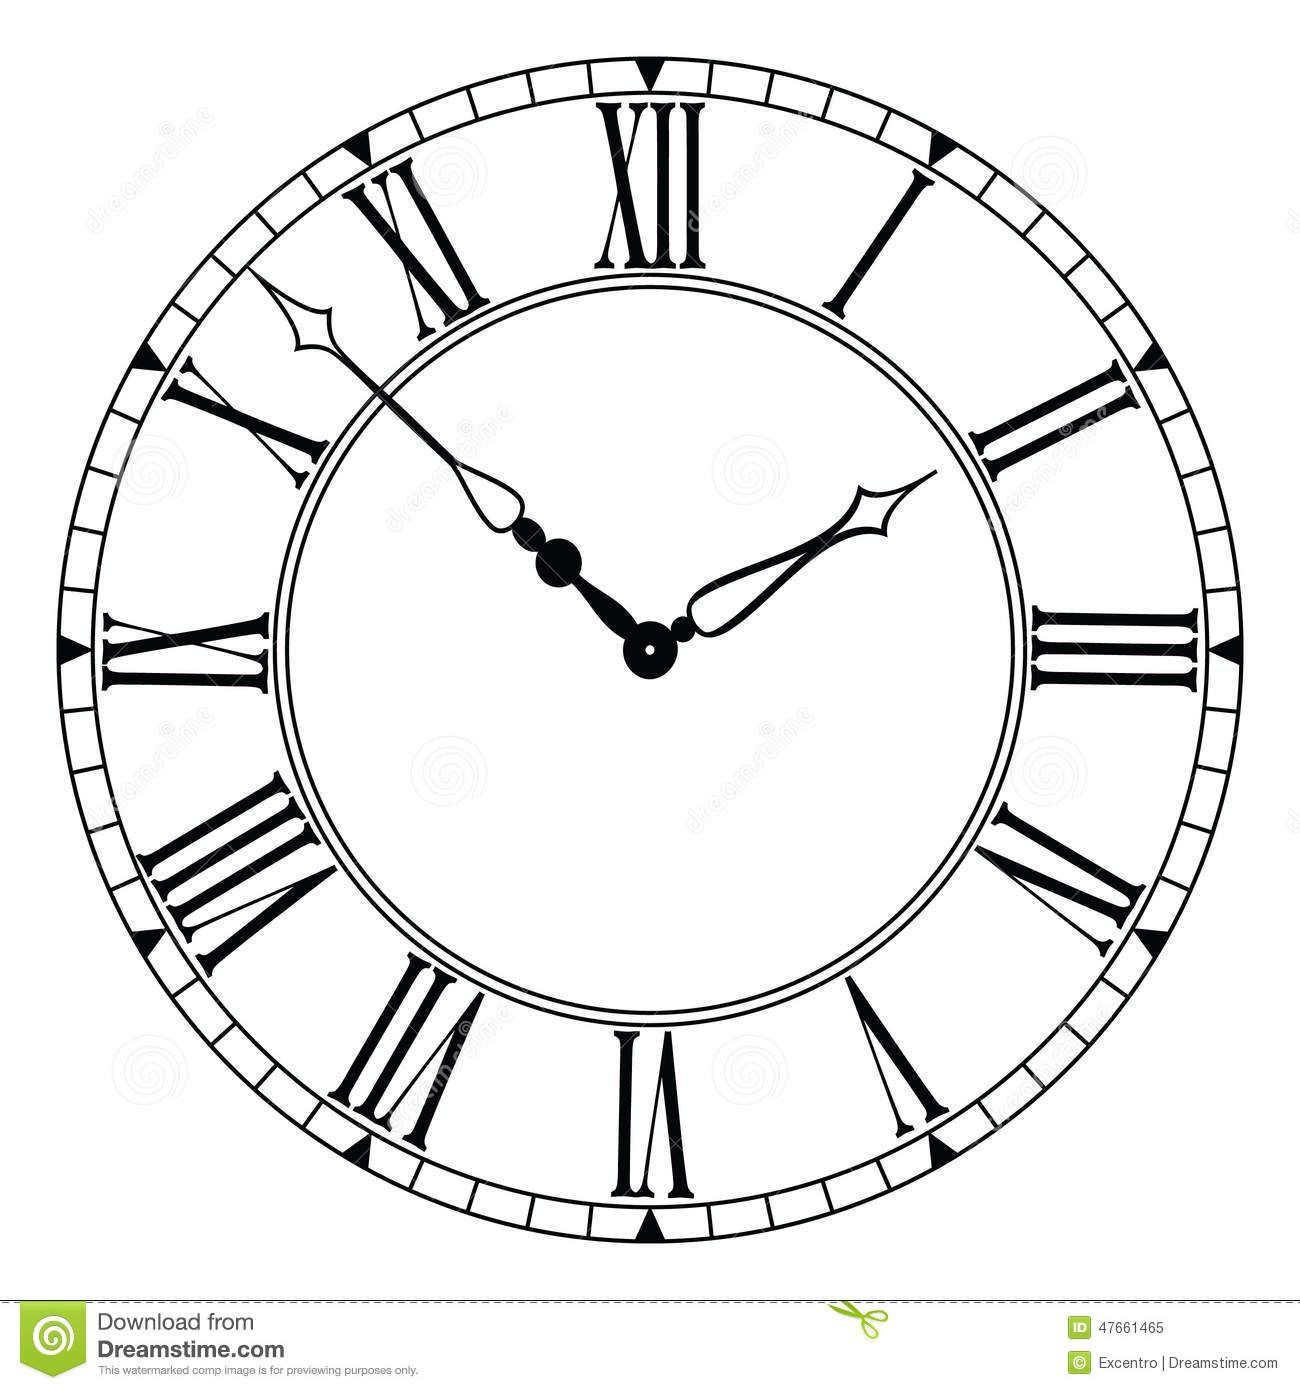 Roman Numeral Clock Face Vector At Collection Of Roman Numeral Clock Face